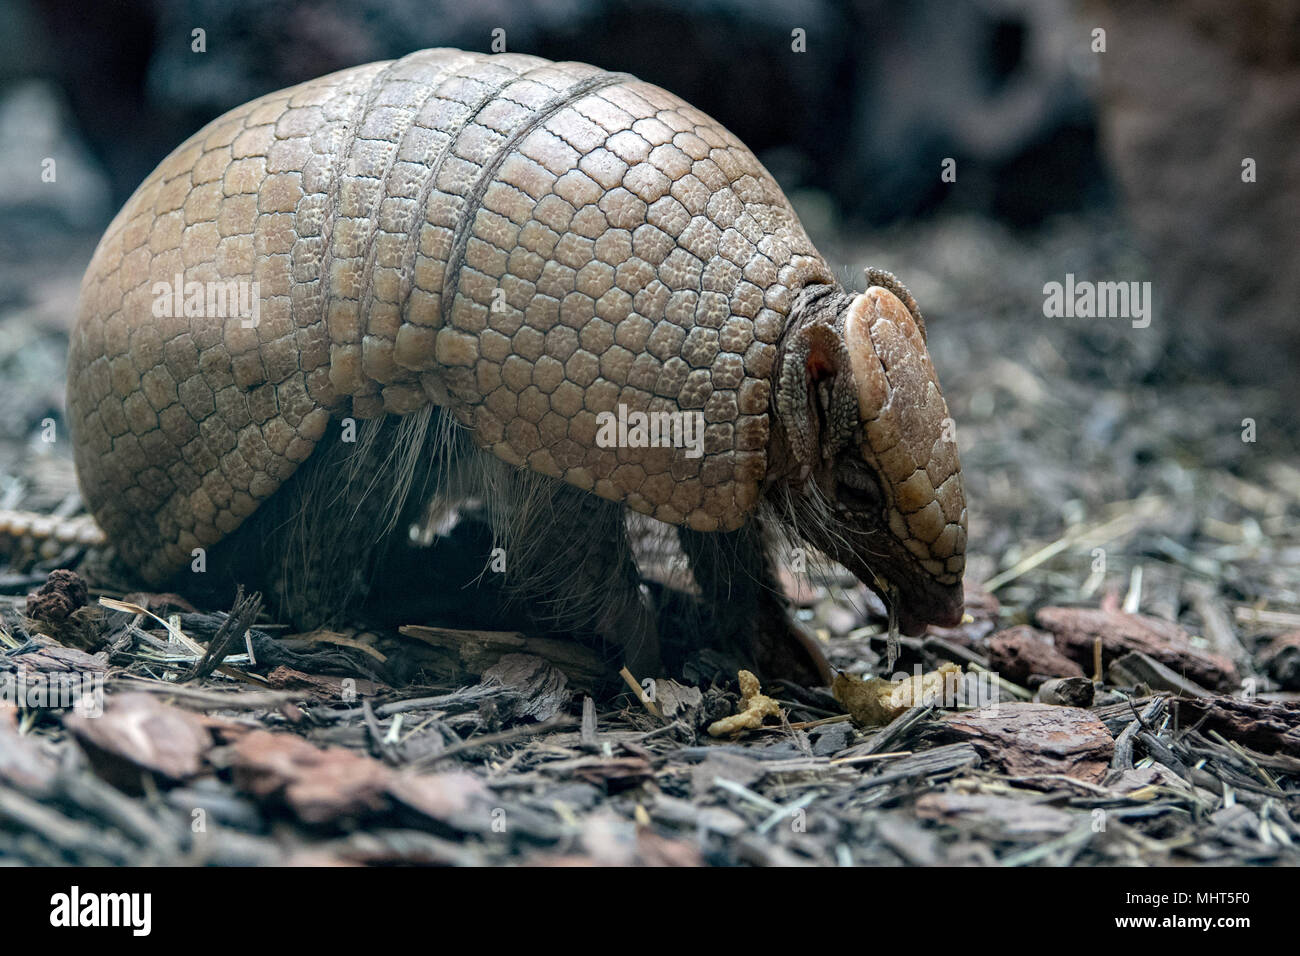 armadillo close up portrait while eating Stock Photo